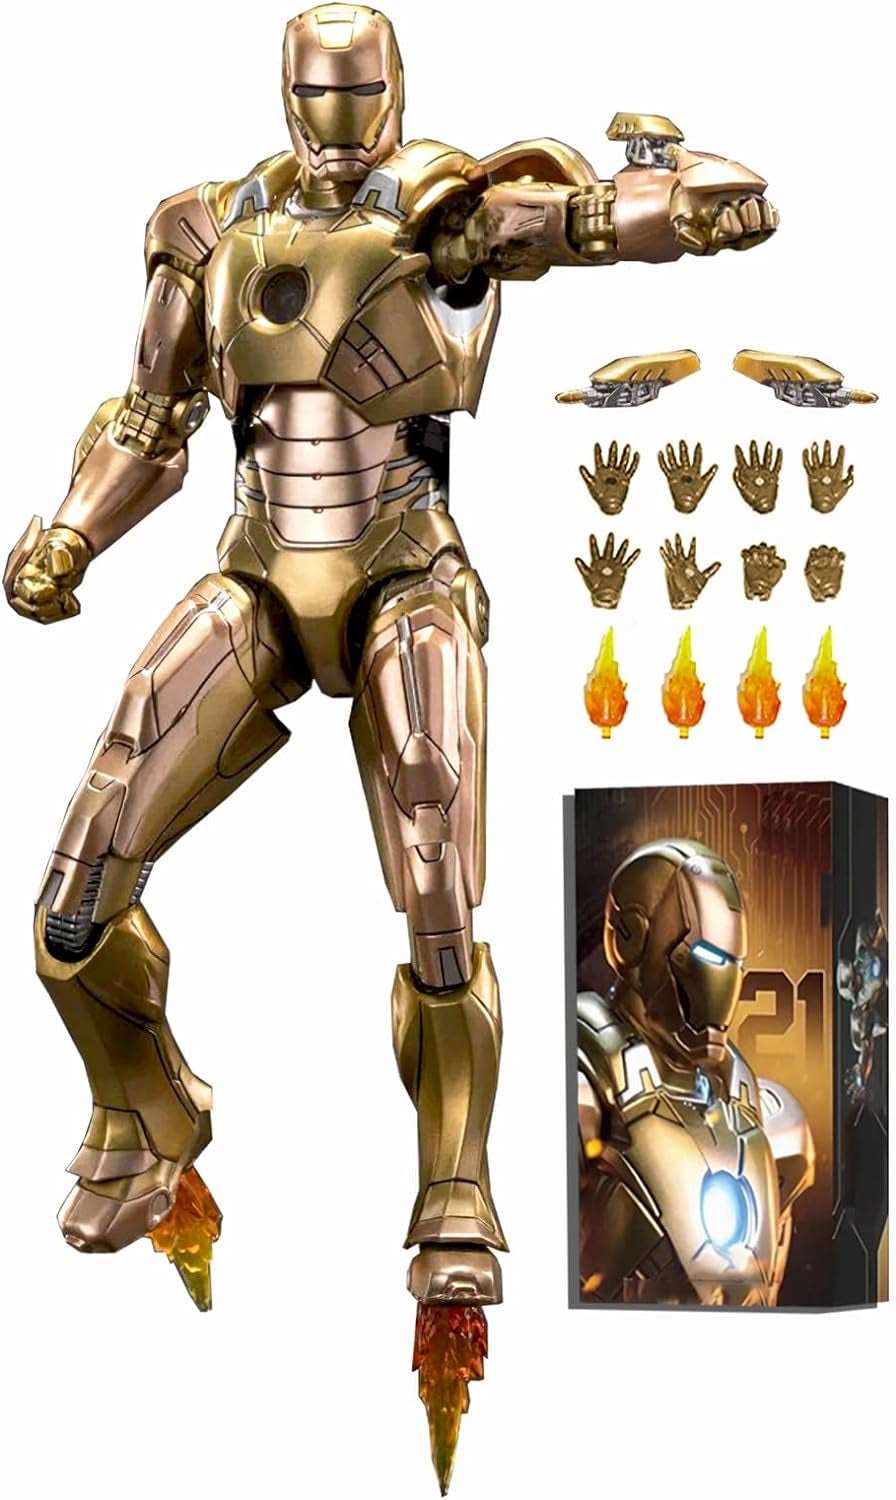 7 Inch Ironman Mark21 Action Figure (1/10 Scale) with Lots of Accessories,Exquisite Painting Collectible Toy